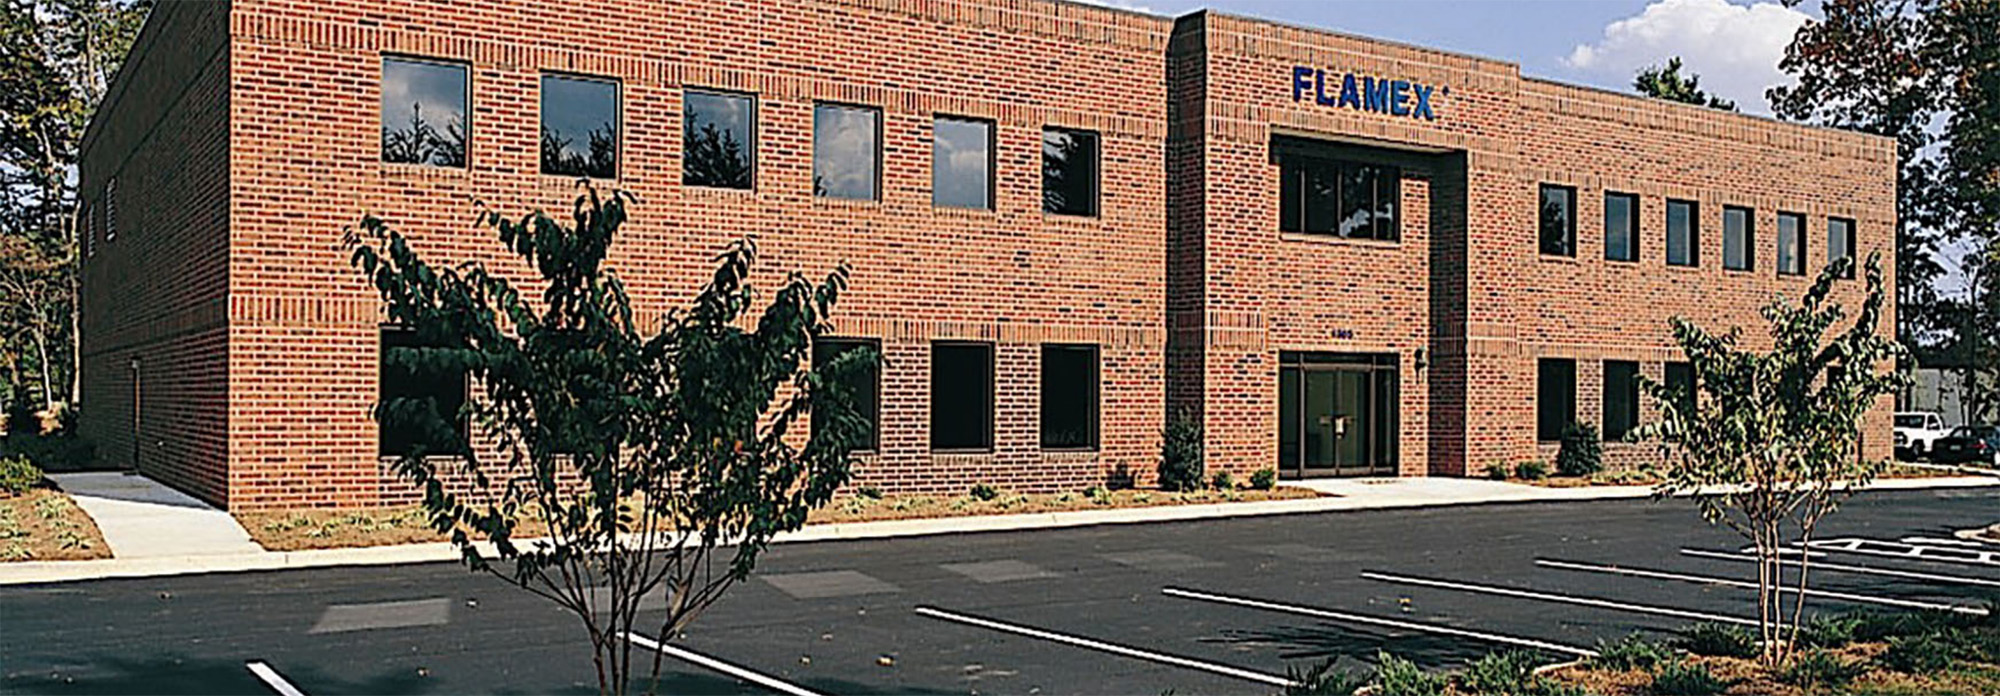 Flamex Building